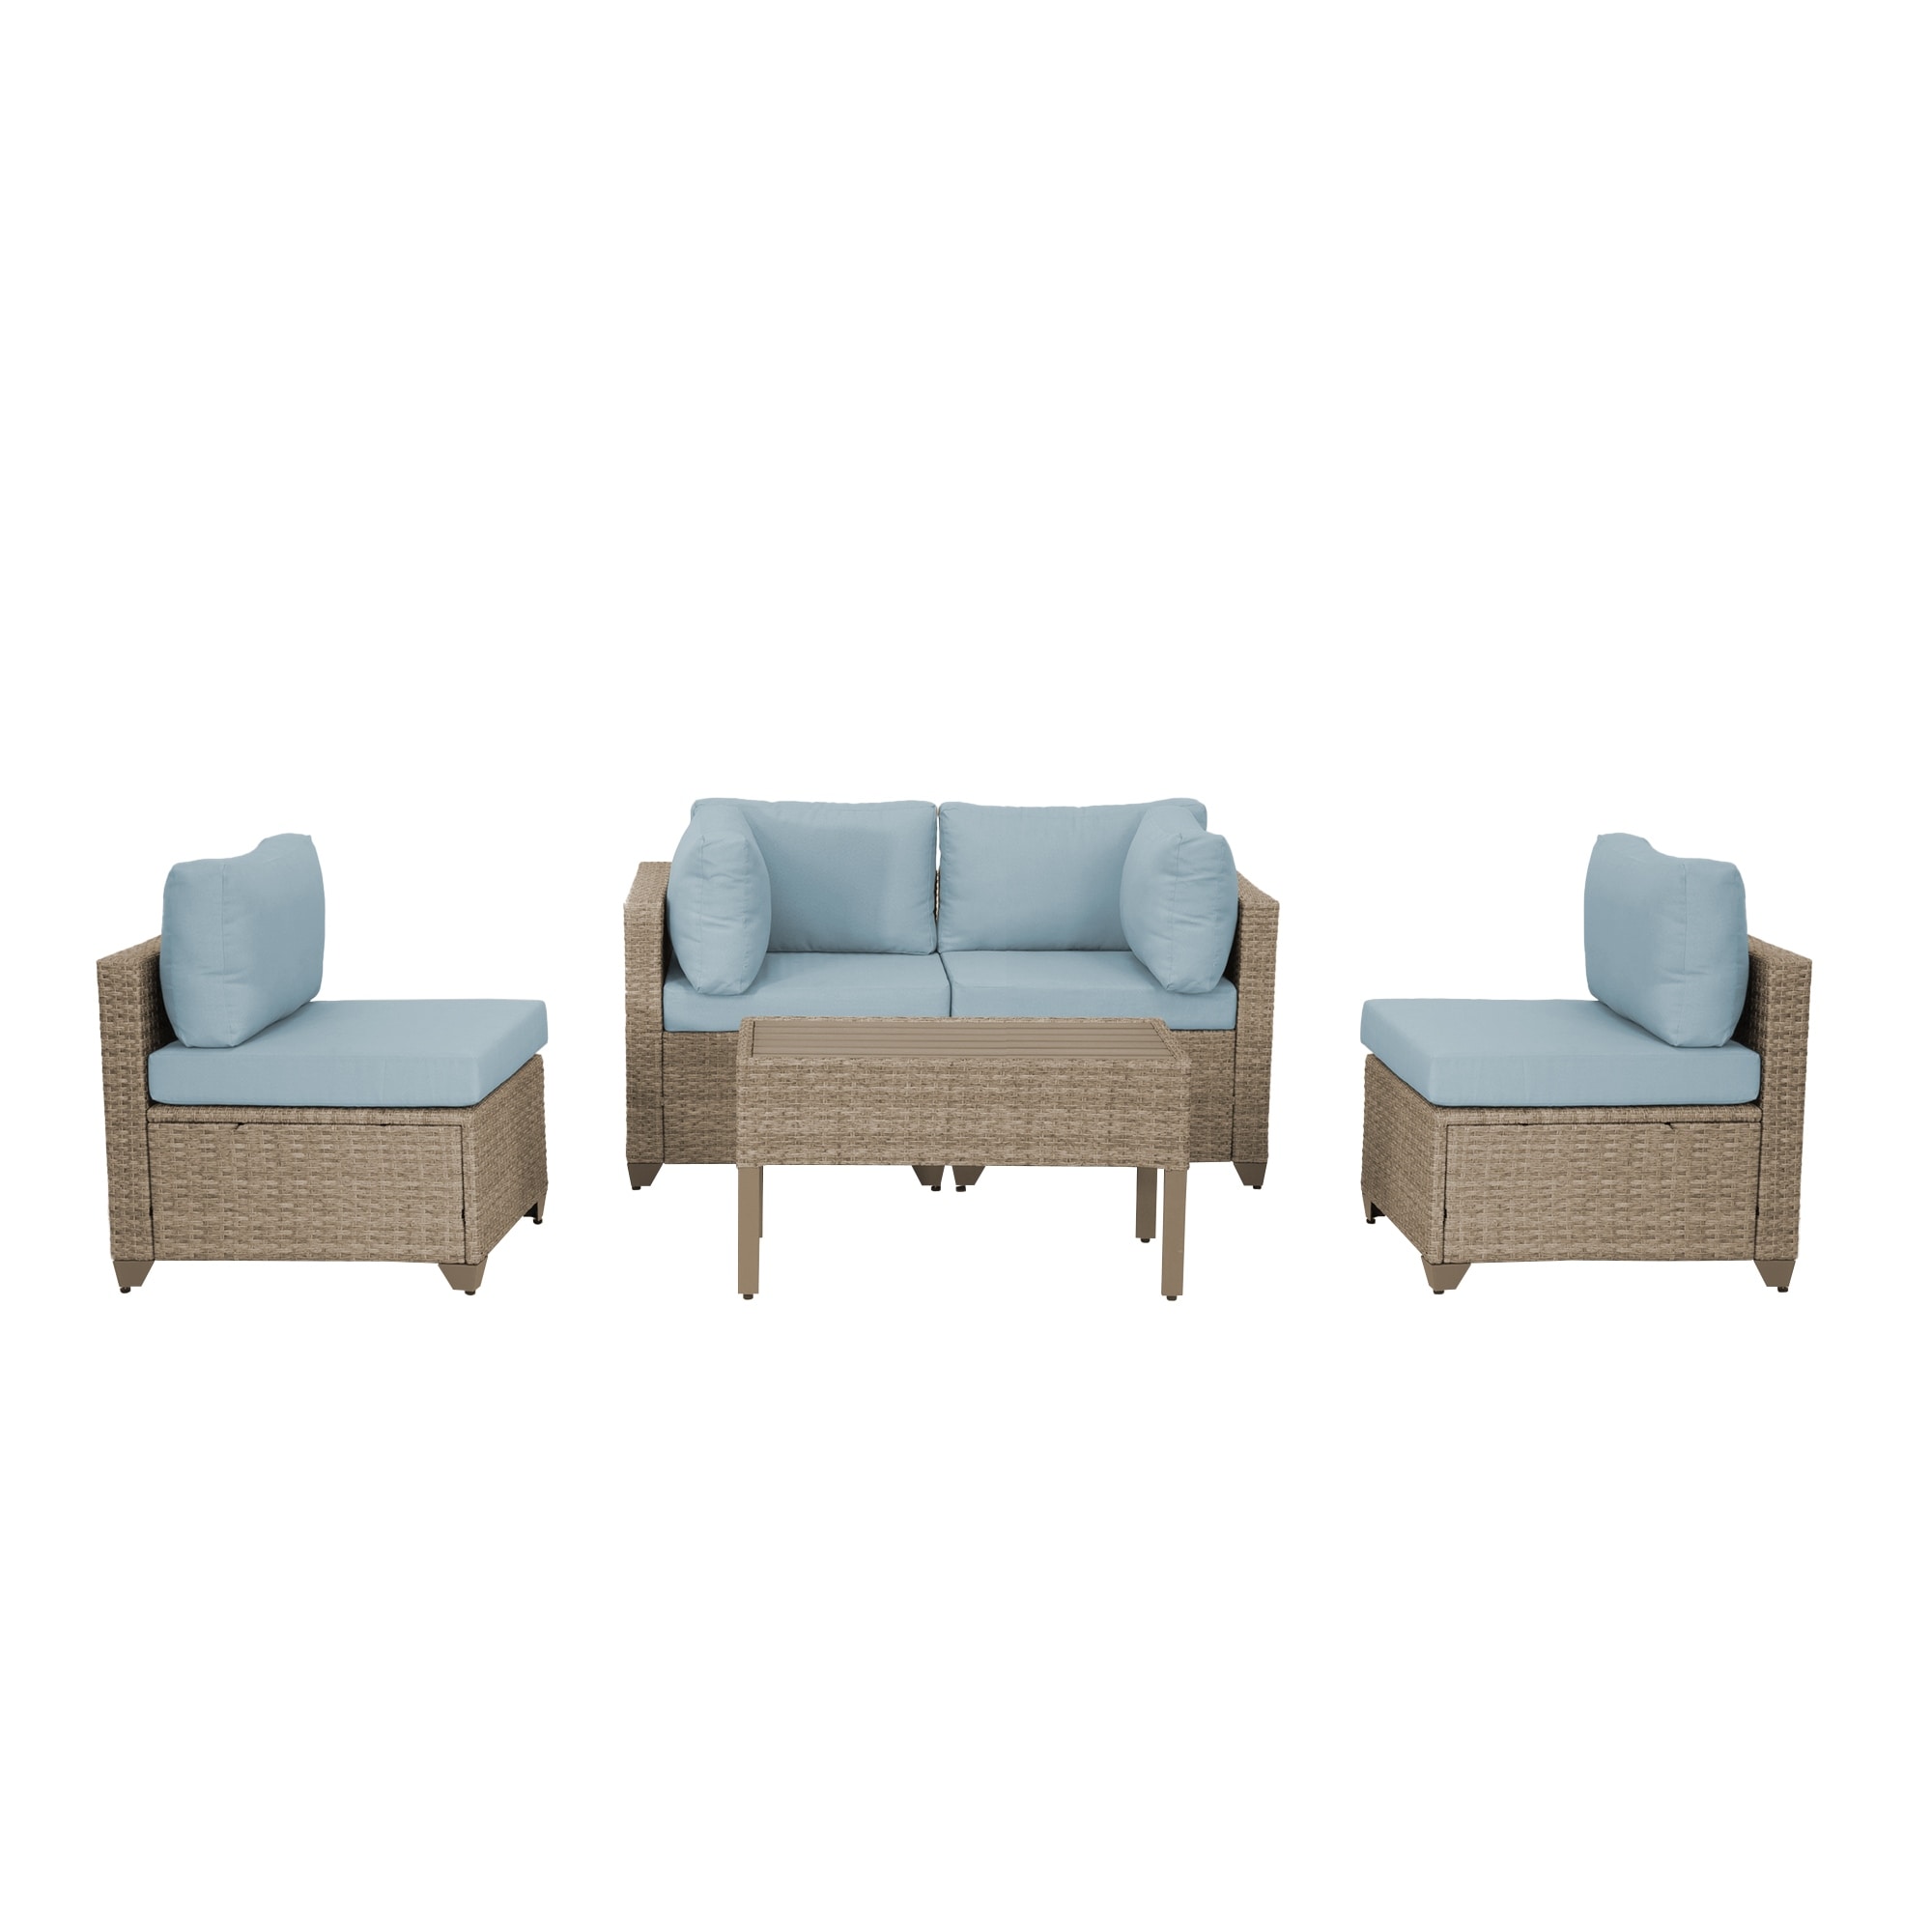 Maui 5-piece Outdoor Conversation Set Including 2 Armless Sofa Seats And Coffee Table In Natural Aged Wicker